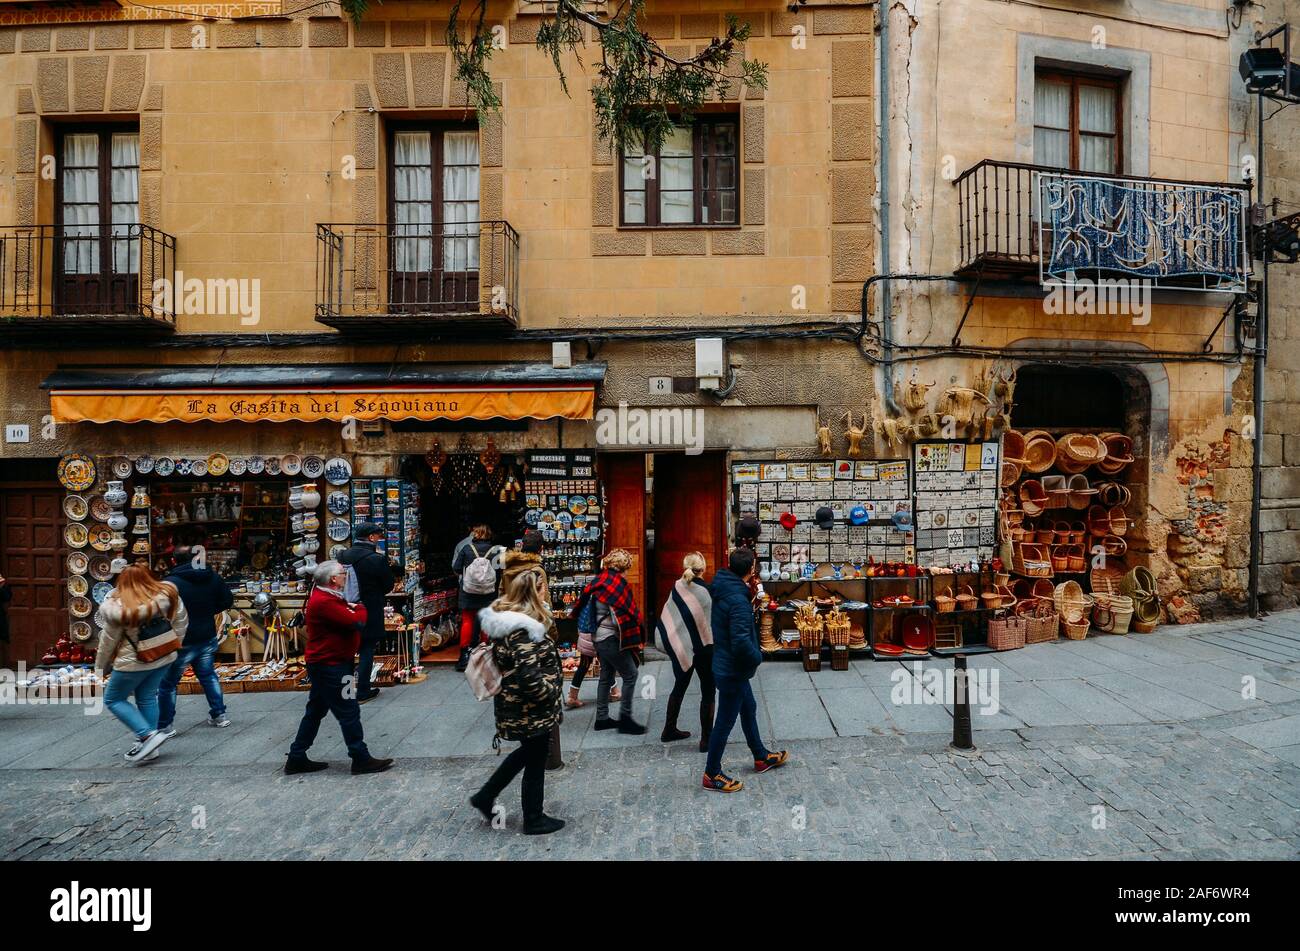 Segovia, Spain - Dec 8, 2019: Tourists walk along a street lined with souvenir shops in the historic centre of Segovia, Spain Stock Photo